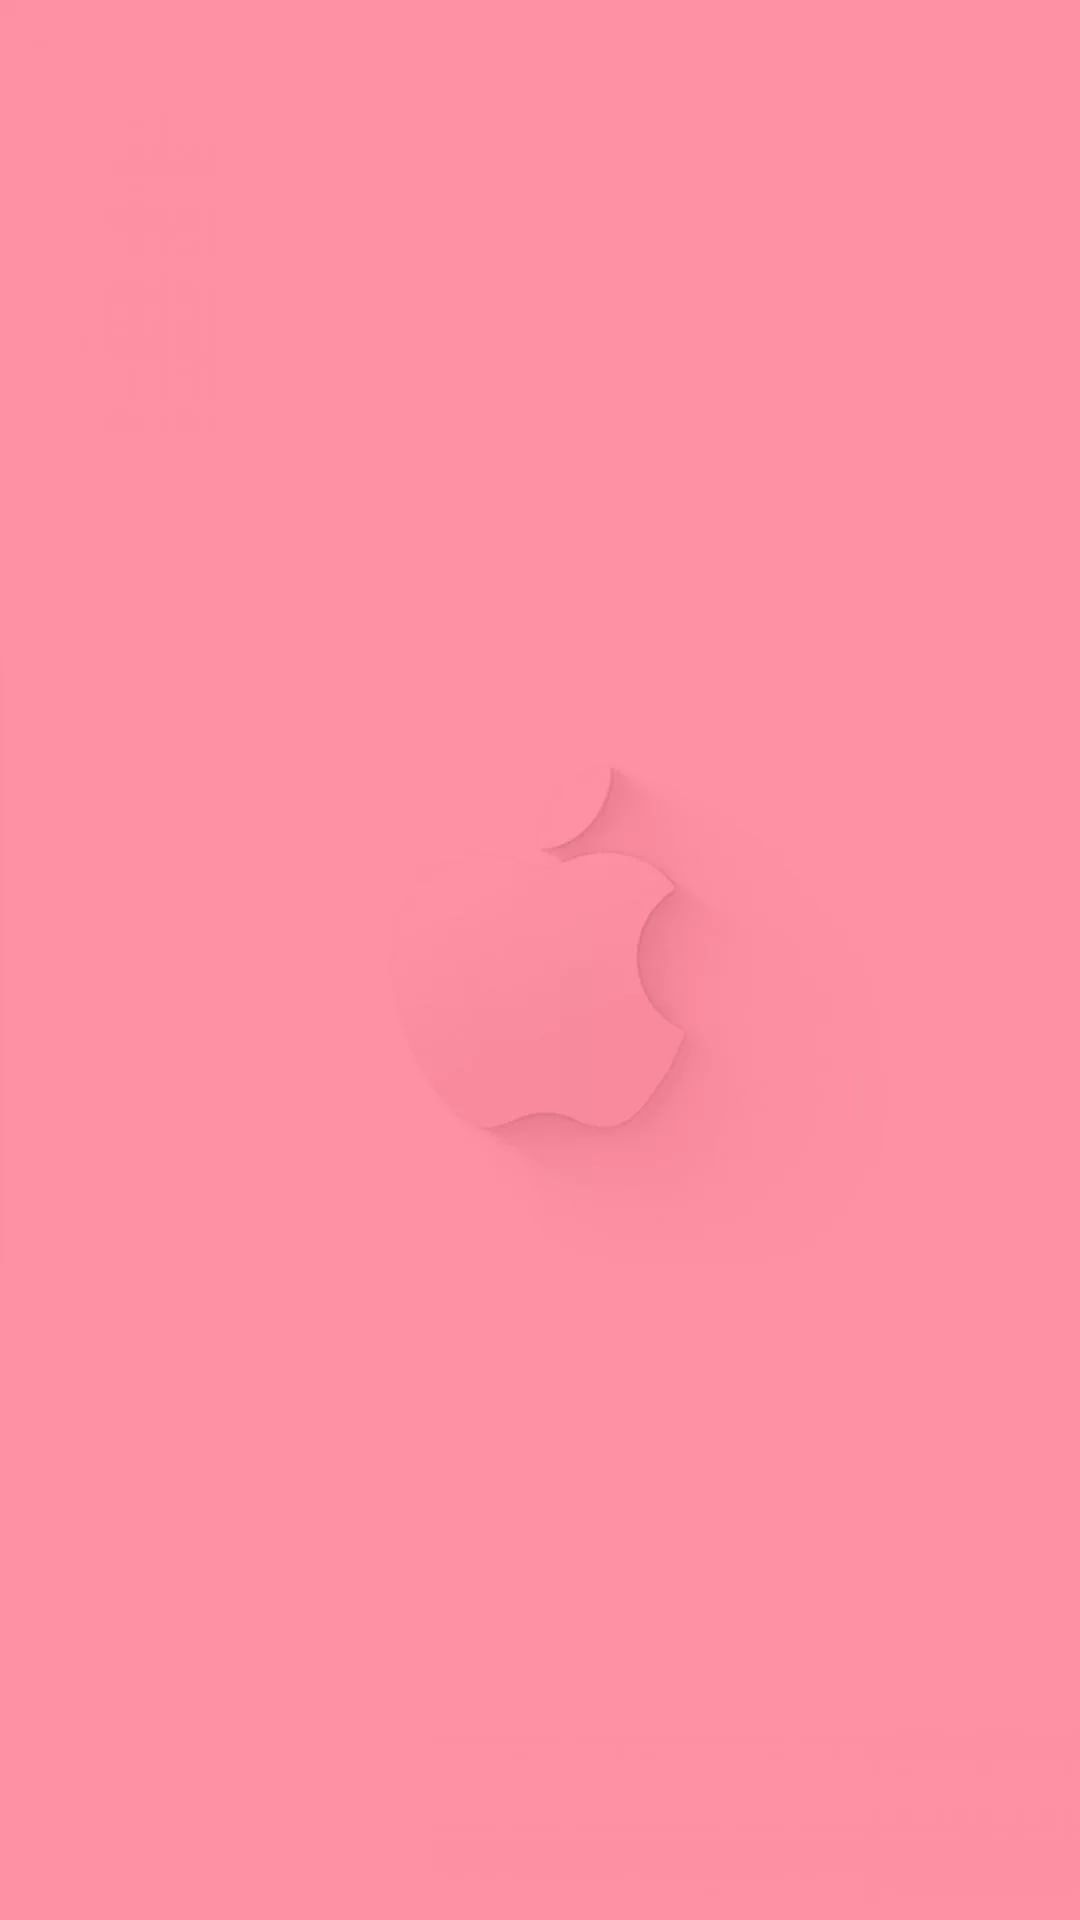 Solid Pink iPhone Wallpaper